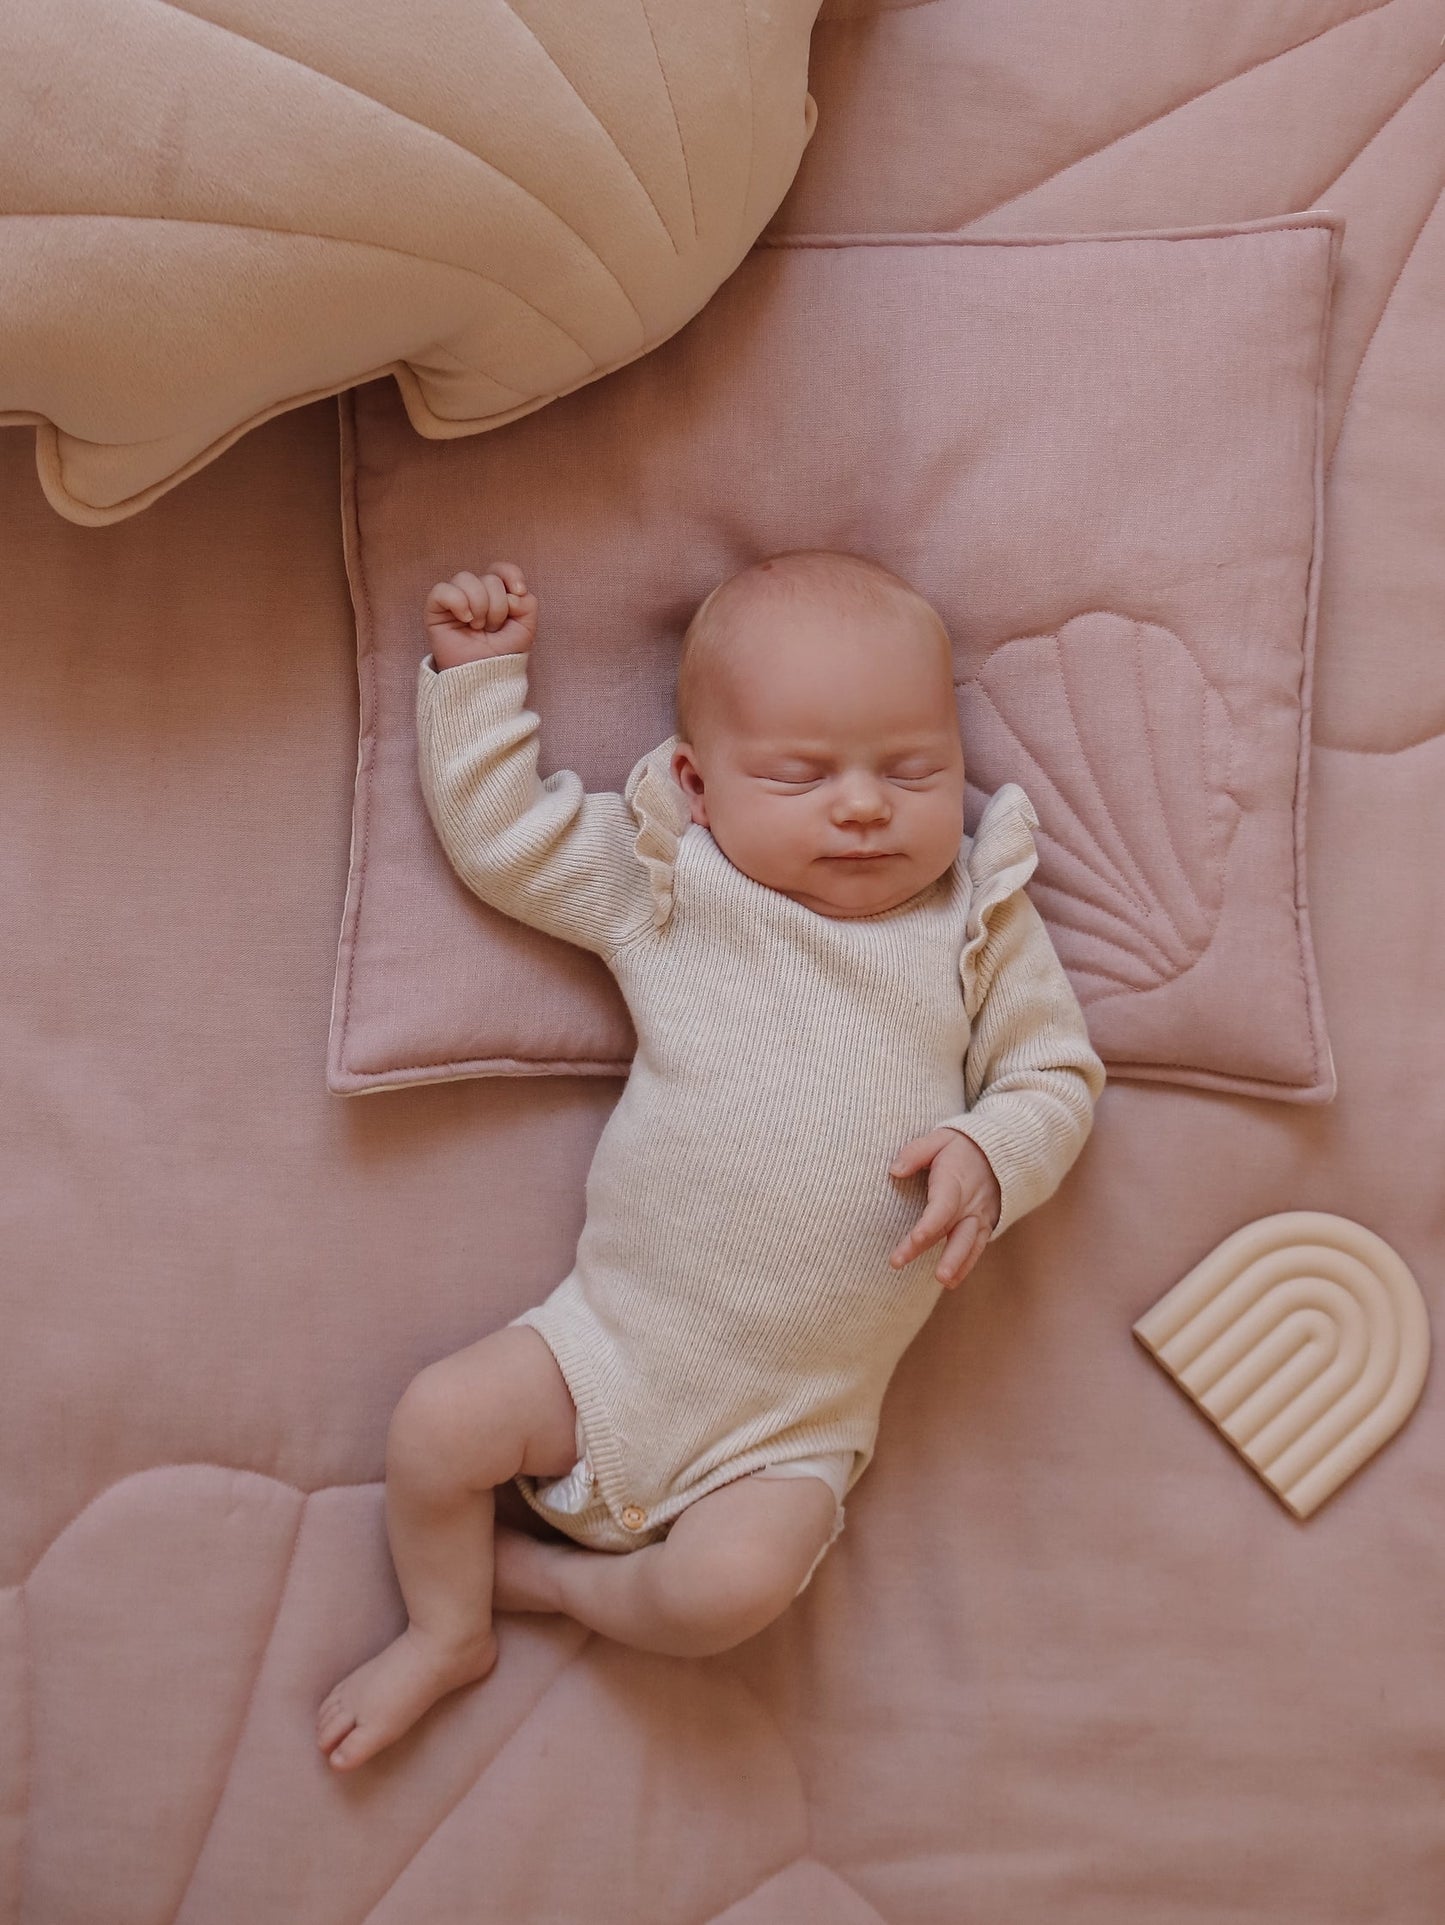 Linen "Powder Pink" Shell Child Cover Set (Large) by Moi Mili